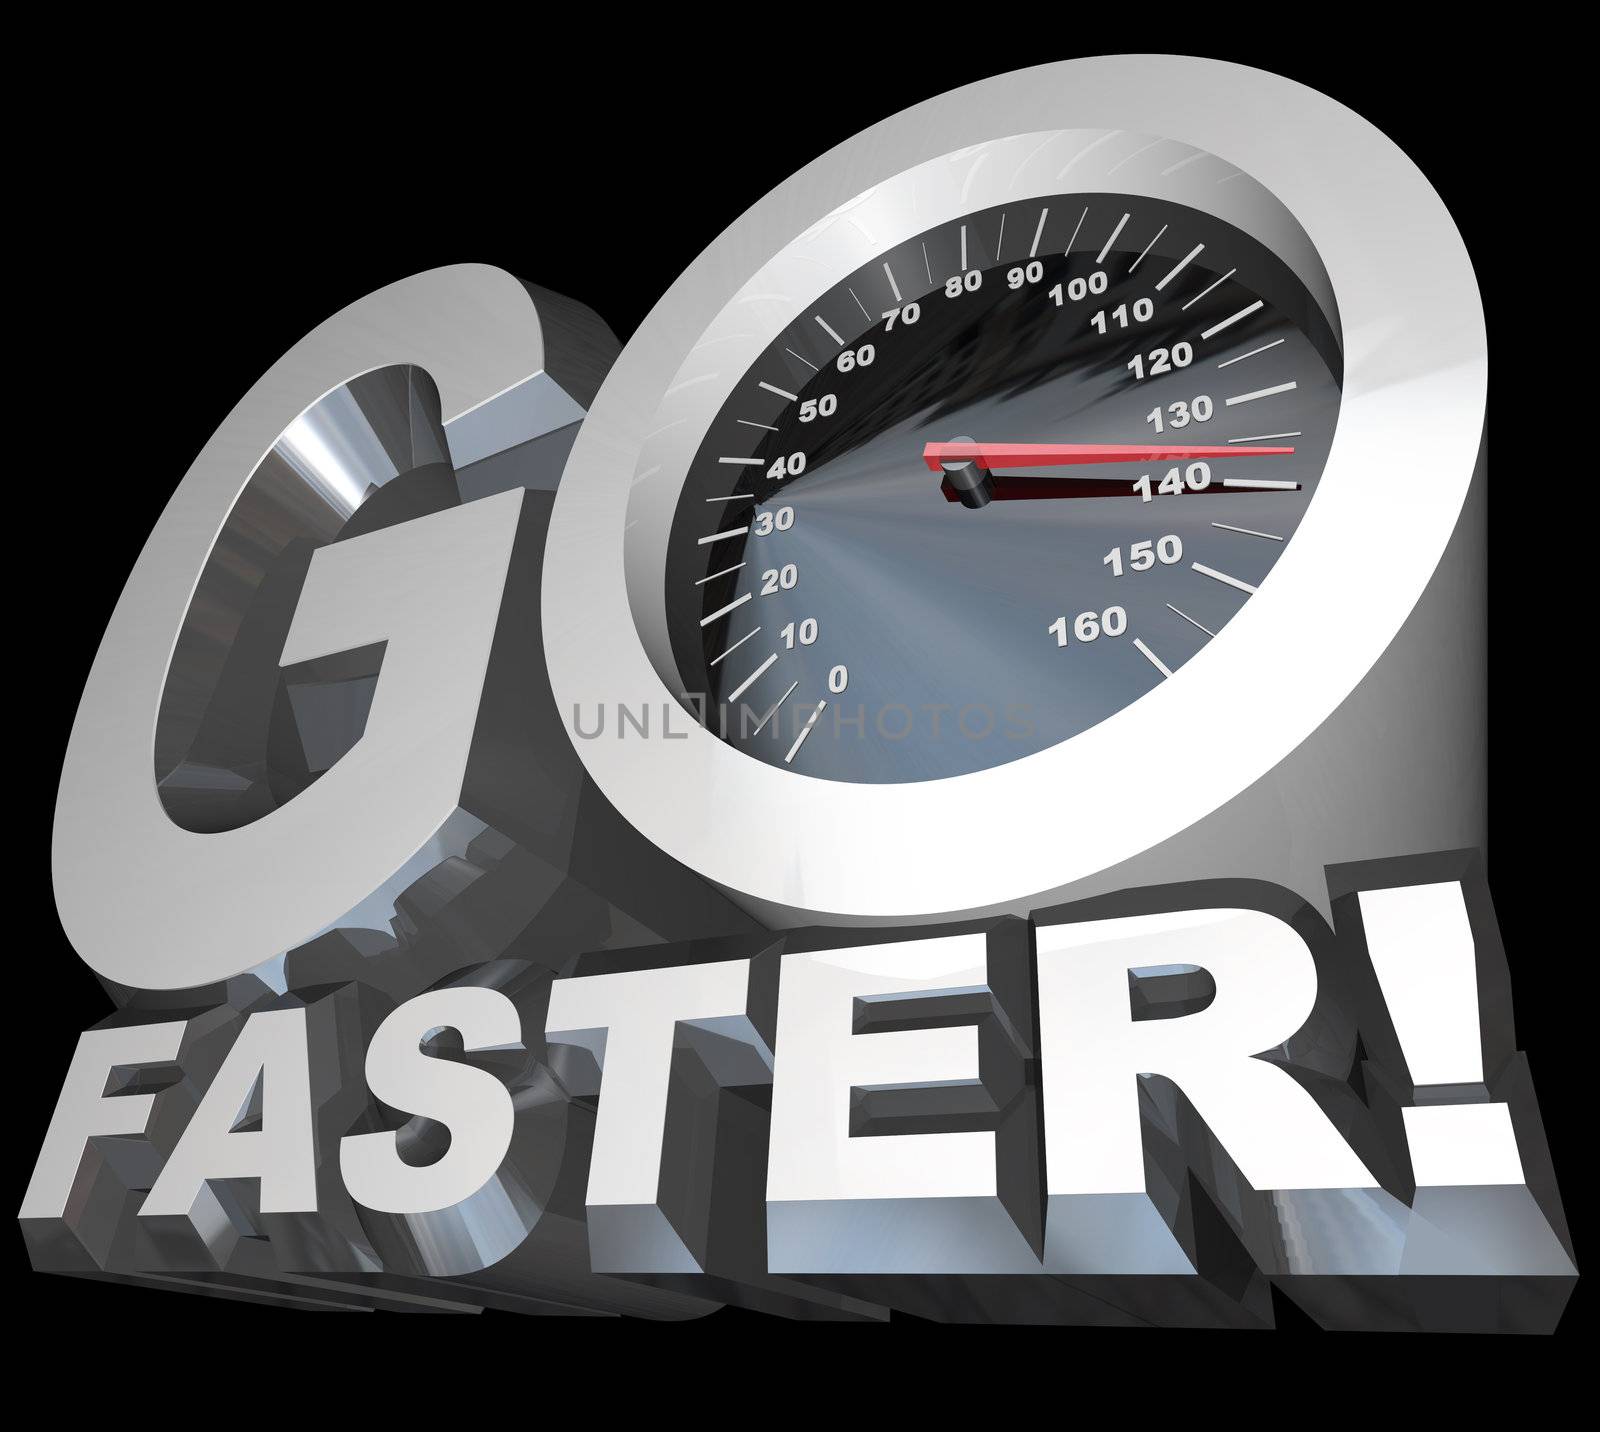 Go Faster Speedometer Racing to Successful Speed by iQoncept